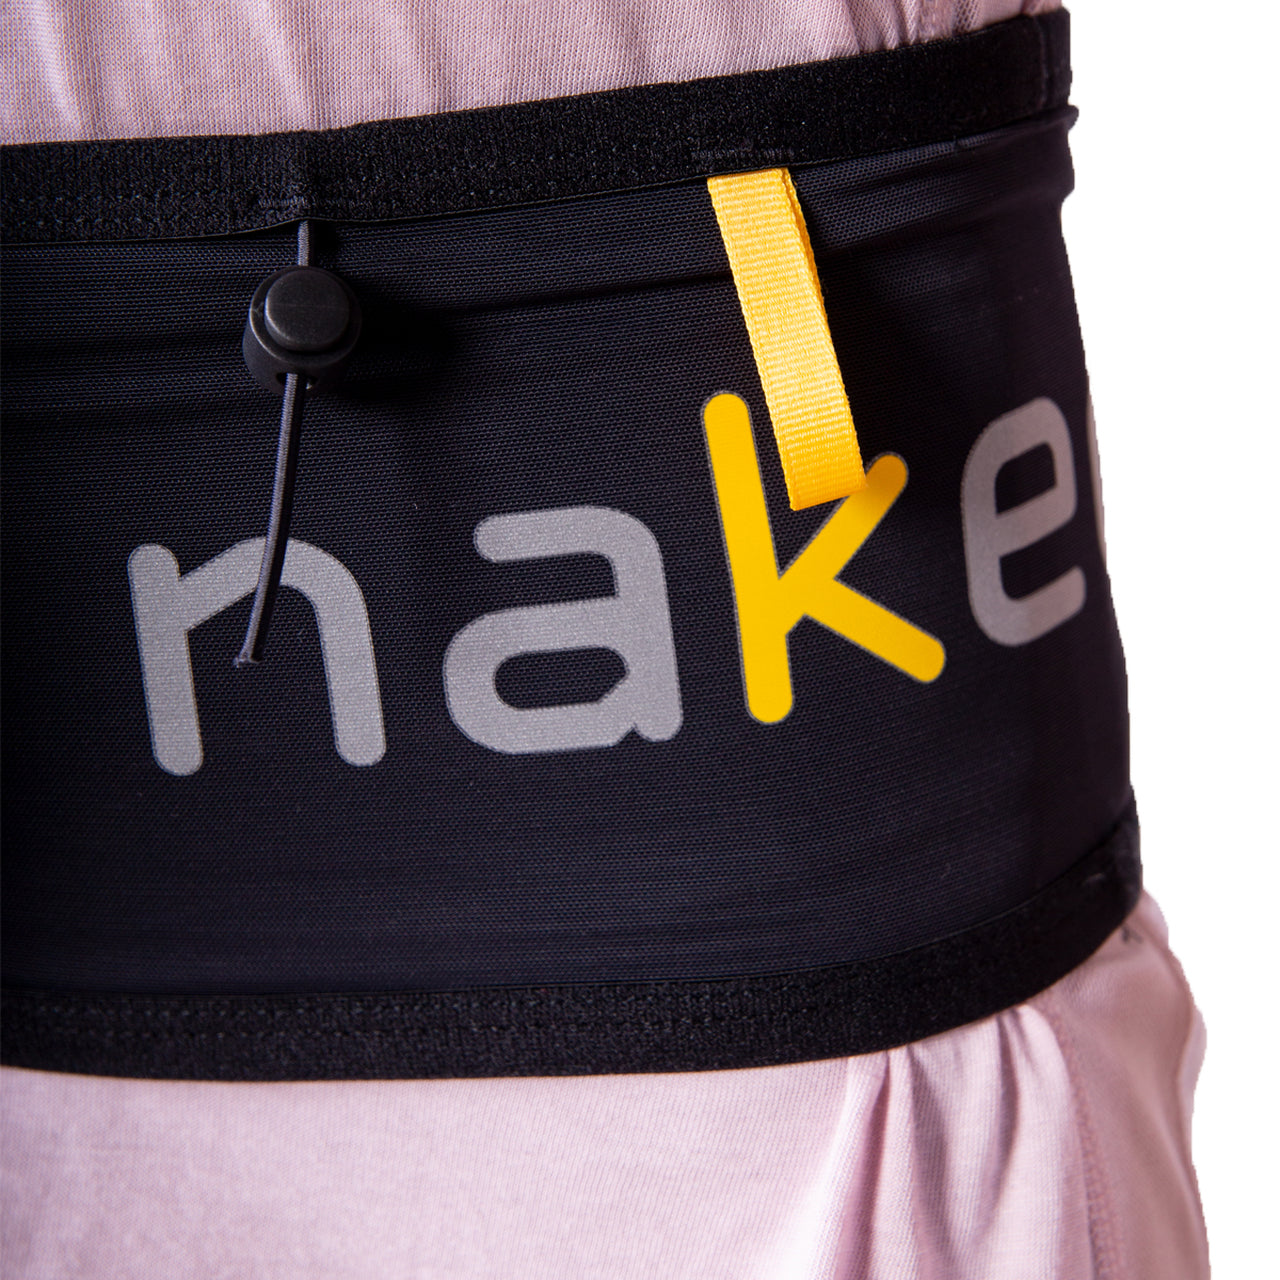 Naked Running Band Bundle (BAND + FLASK 350ML) - Sported